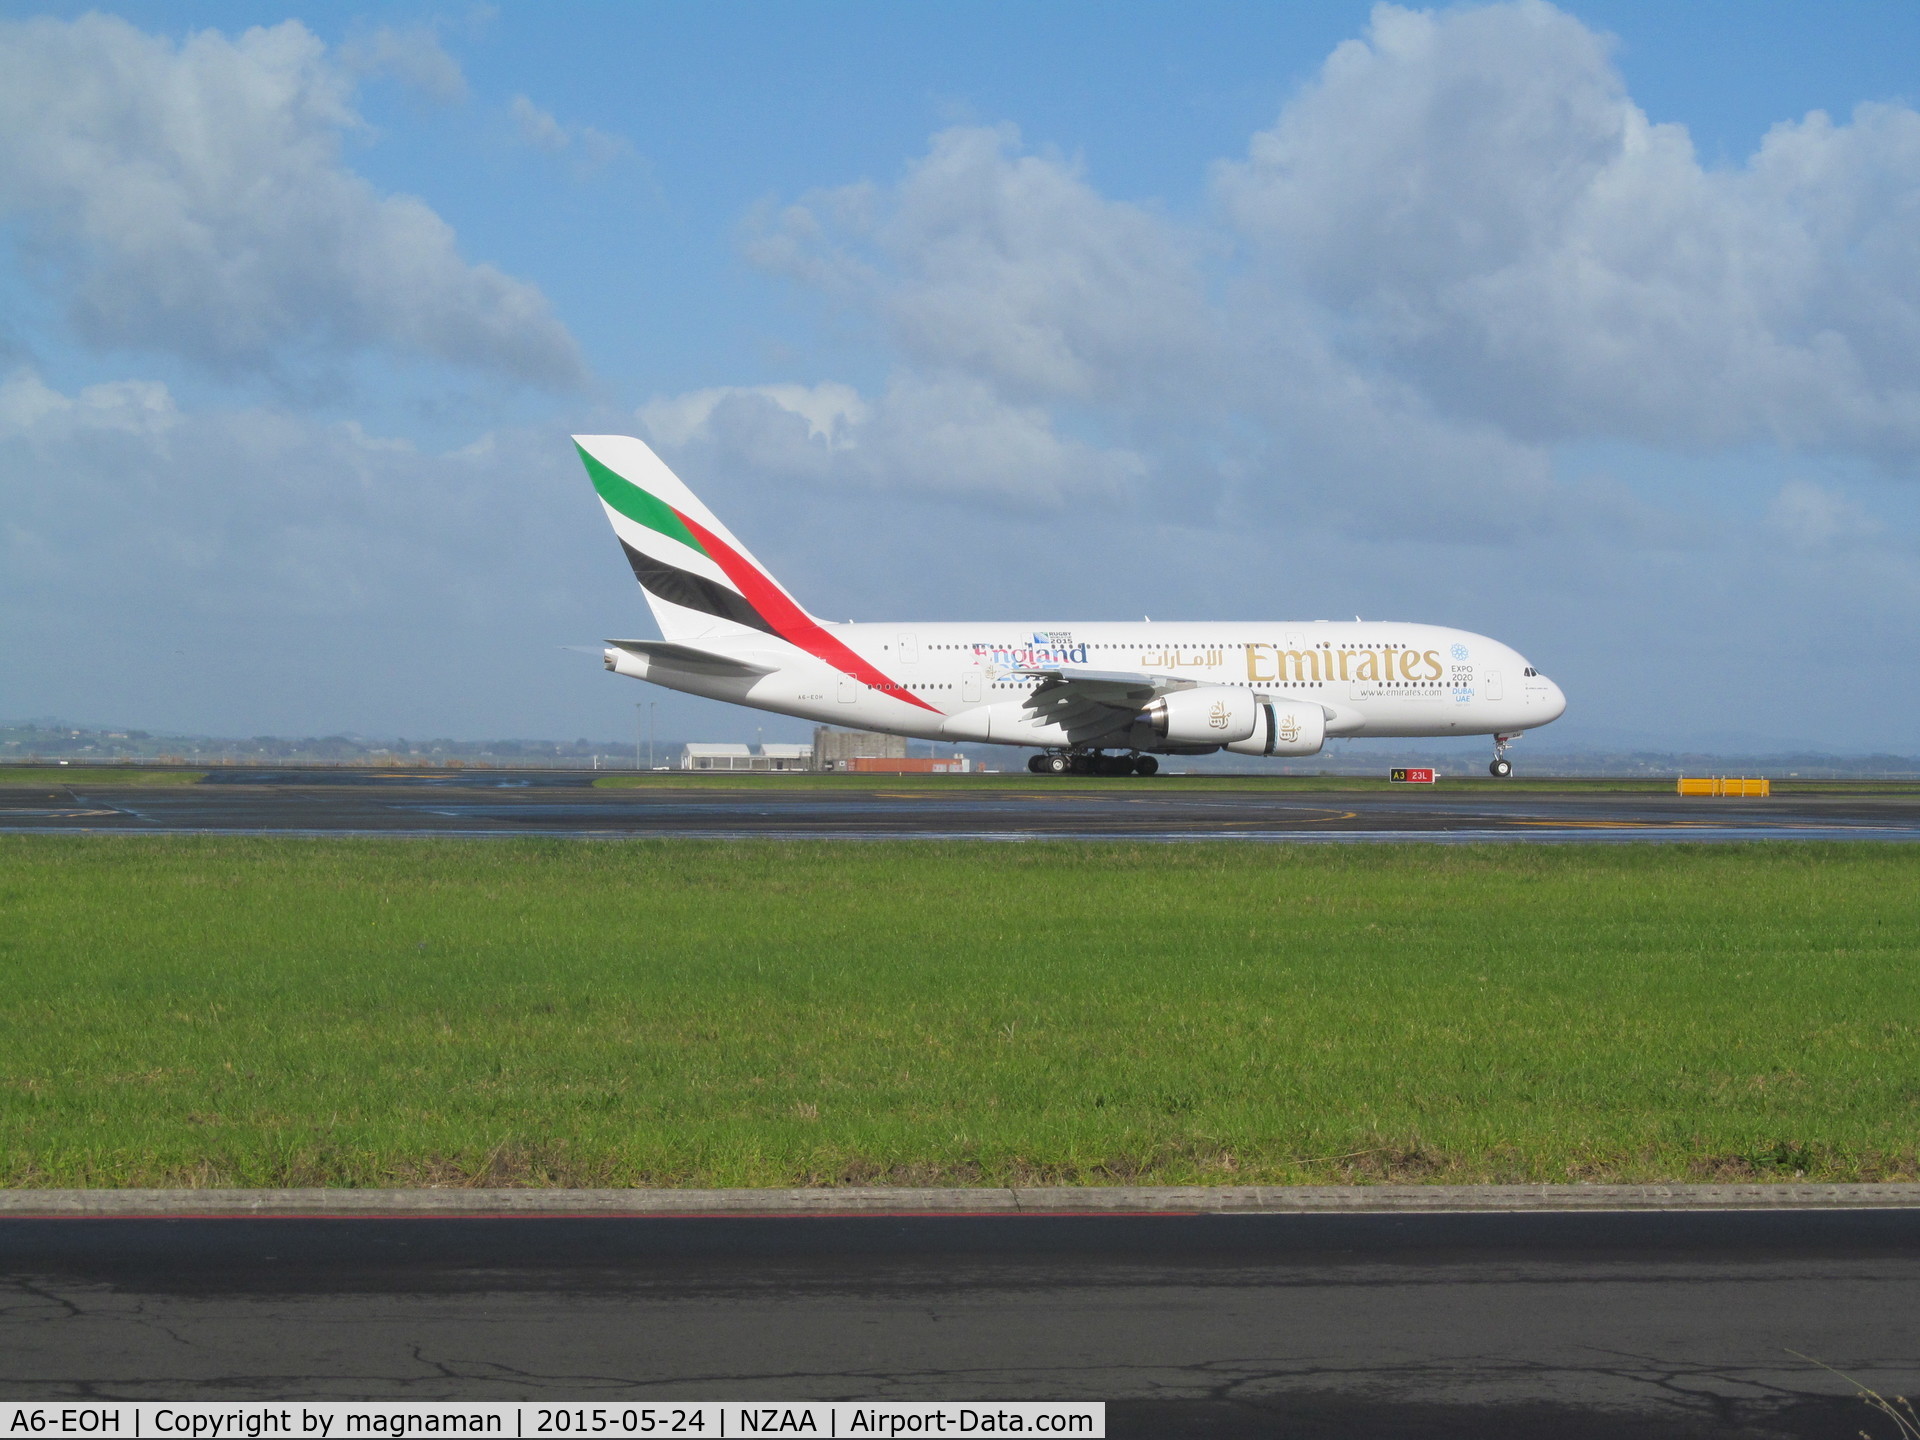 A6-EOH, 2014 Airbus A380-861 C/N 174, Touching down at AKL - with rugby world cup titles